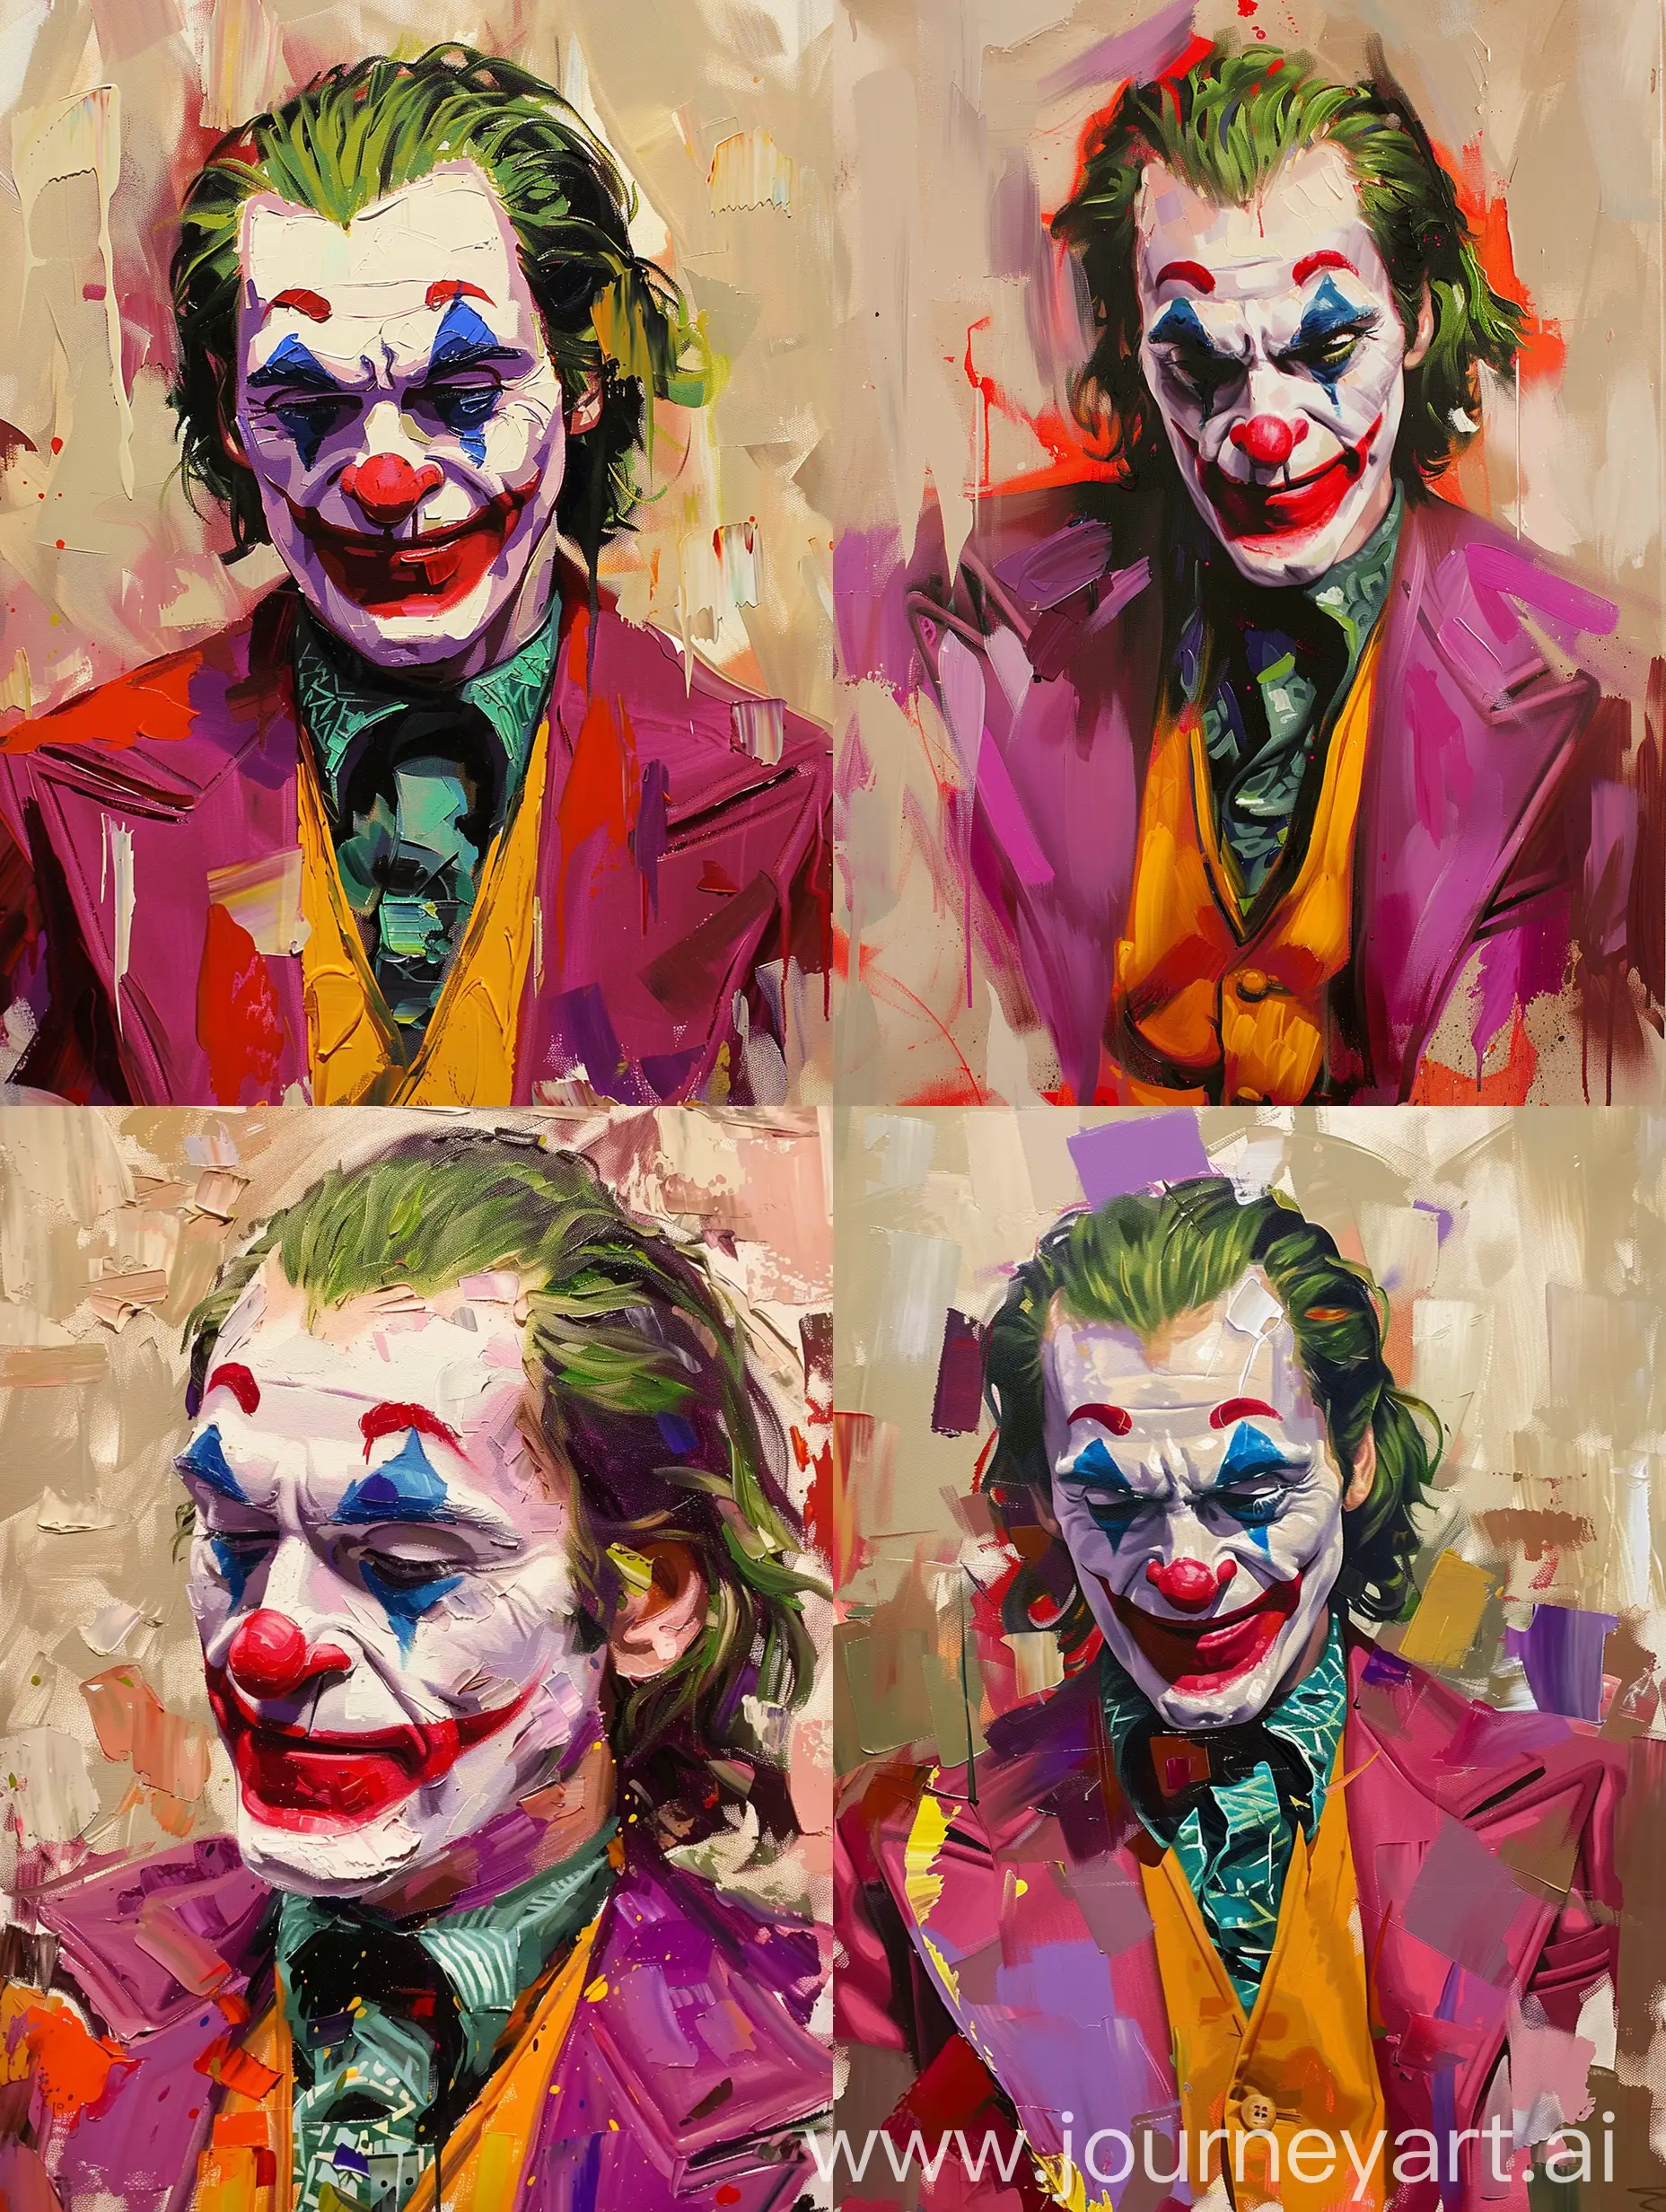 Colorful-Oil-Painting-Joker-in-Star-Wars-Style